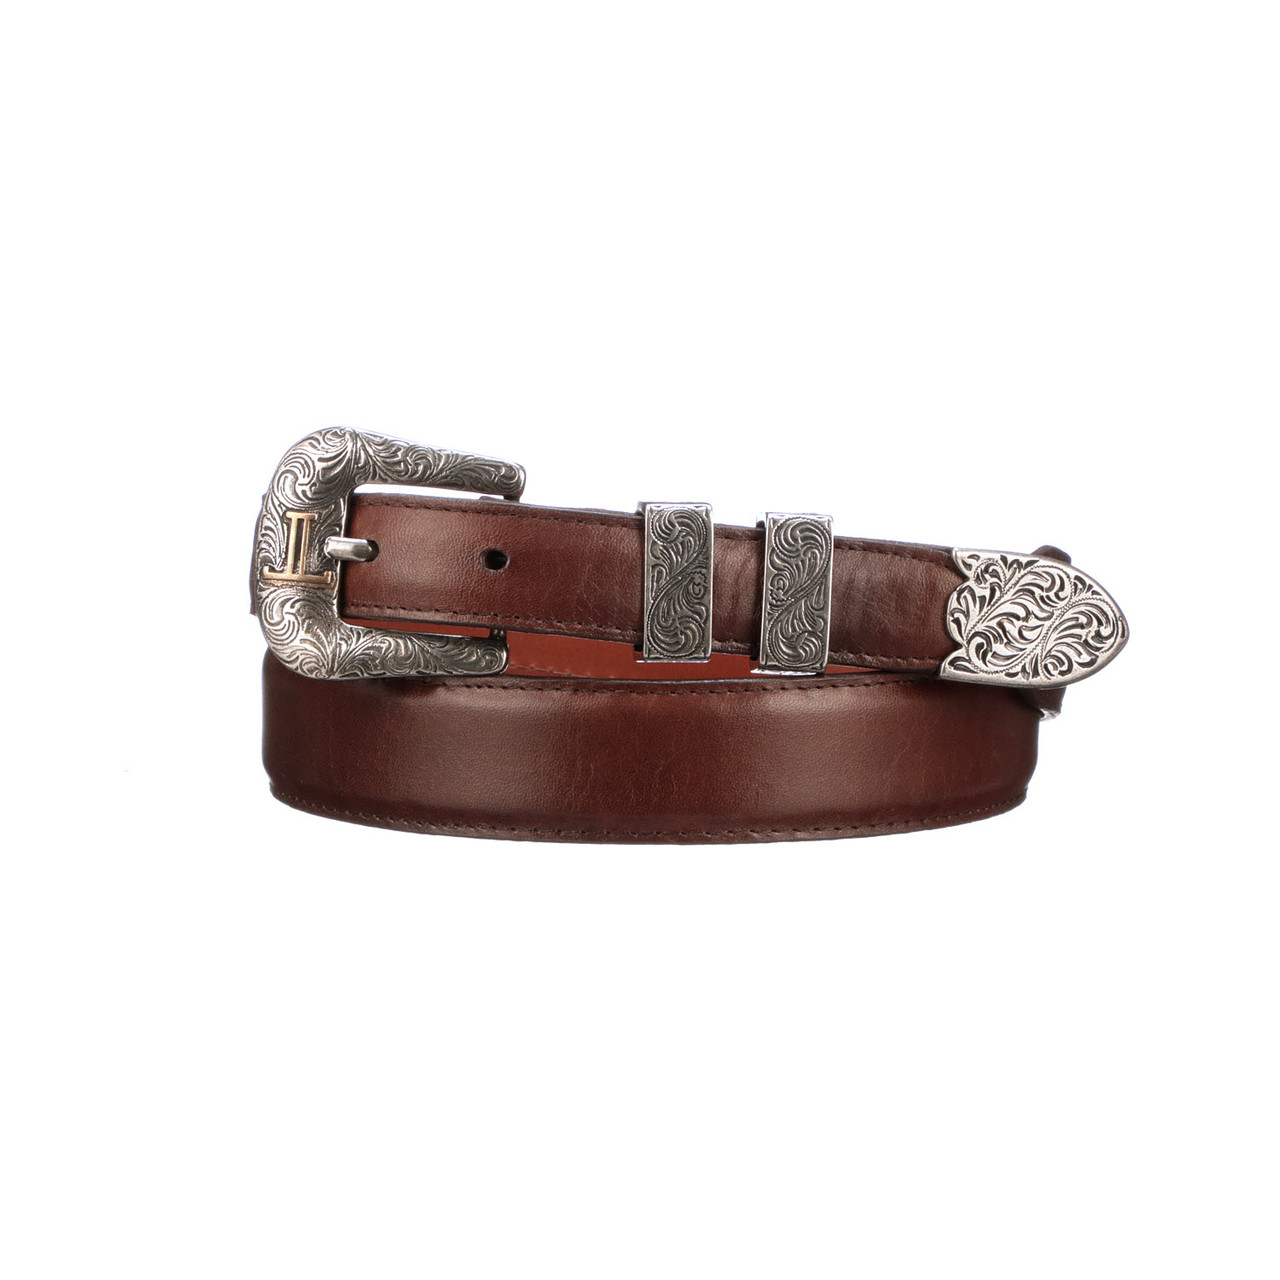 Lucchese Men's Belts - Smooth Ranch Hand / Tapered - Tan - Billy's ...